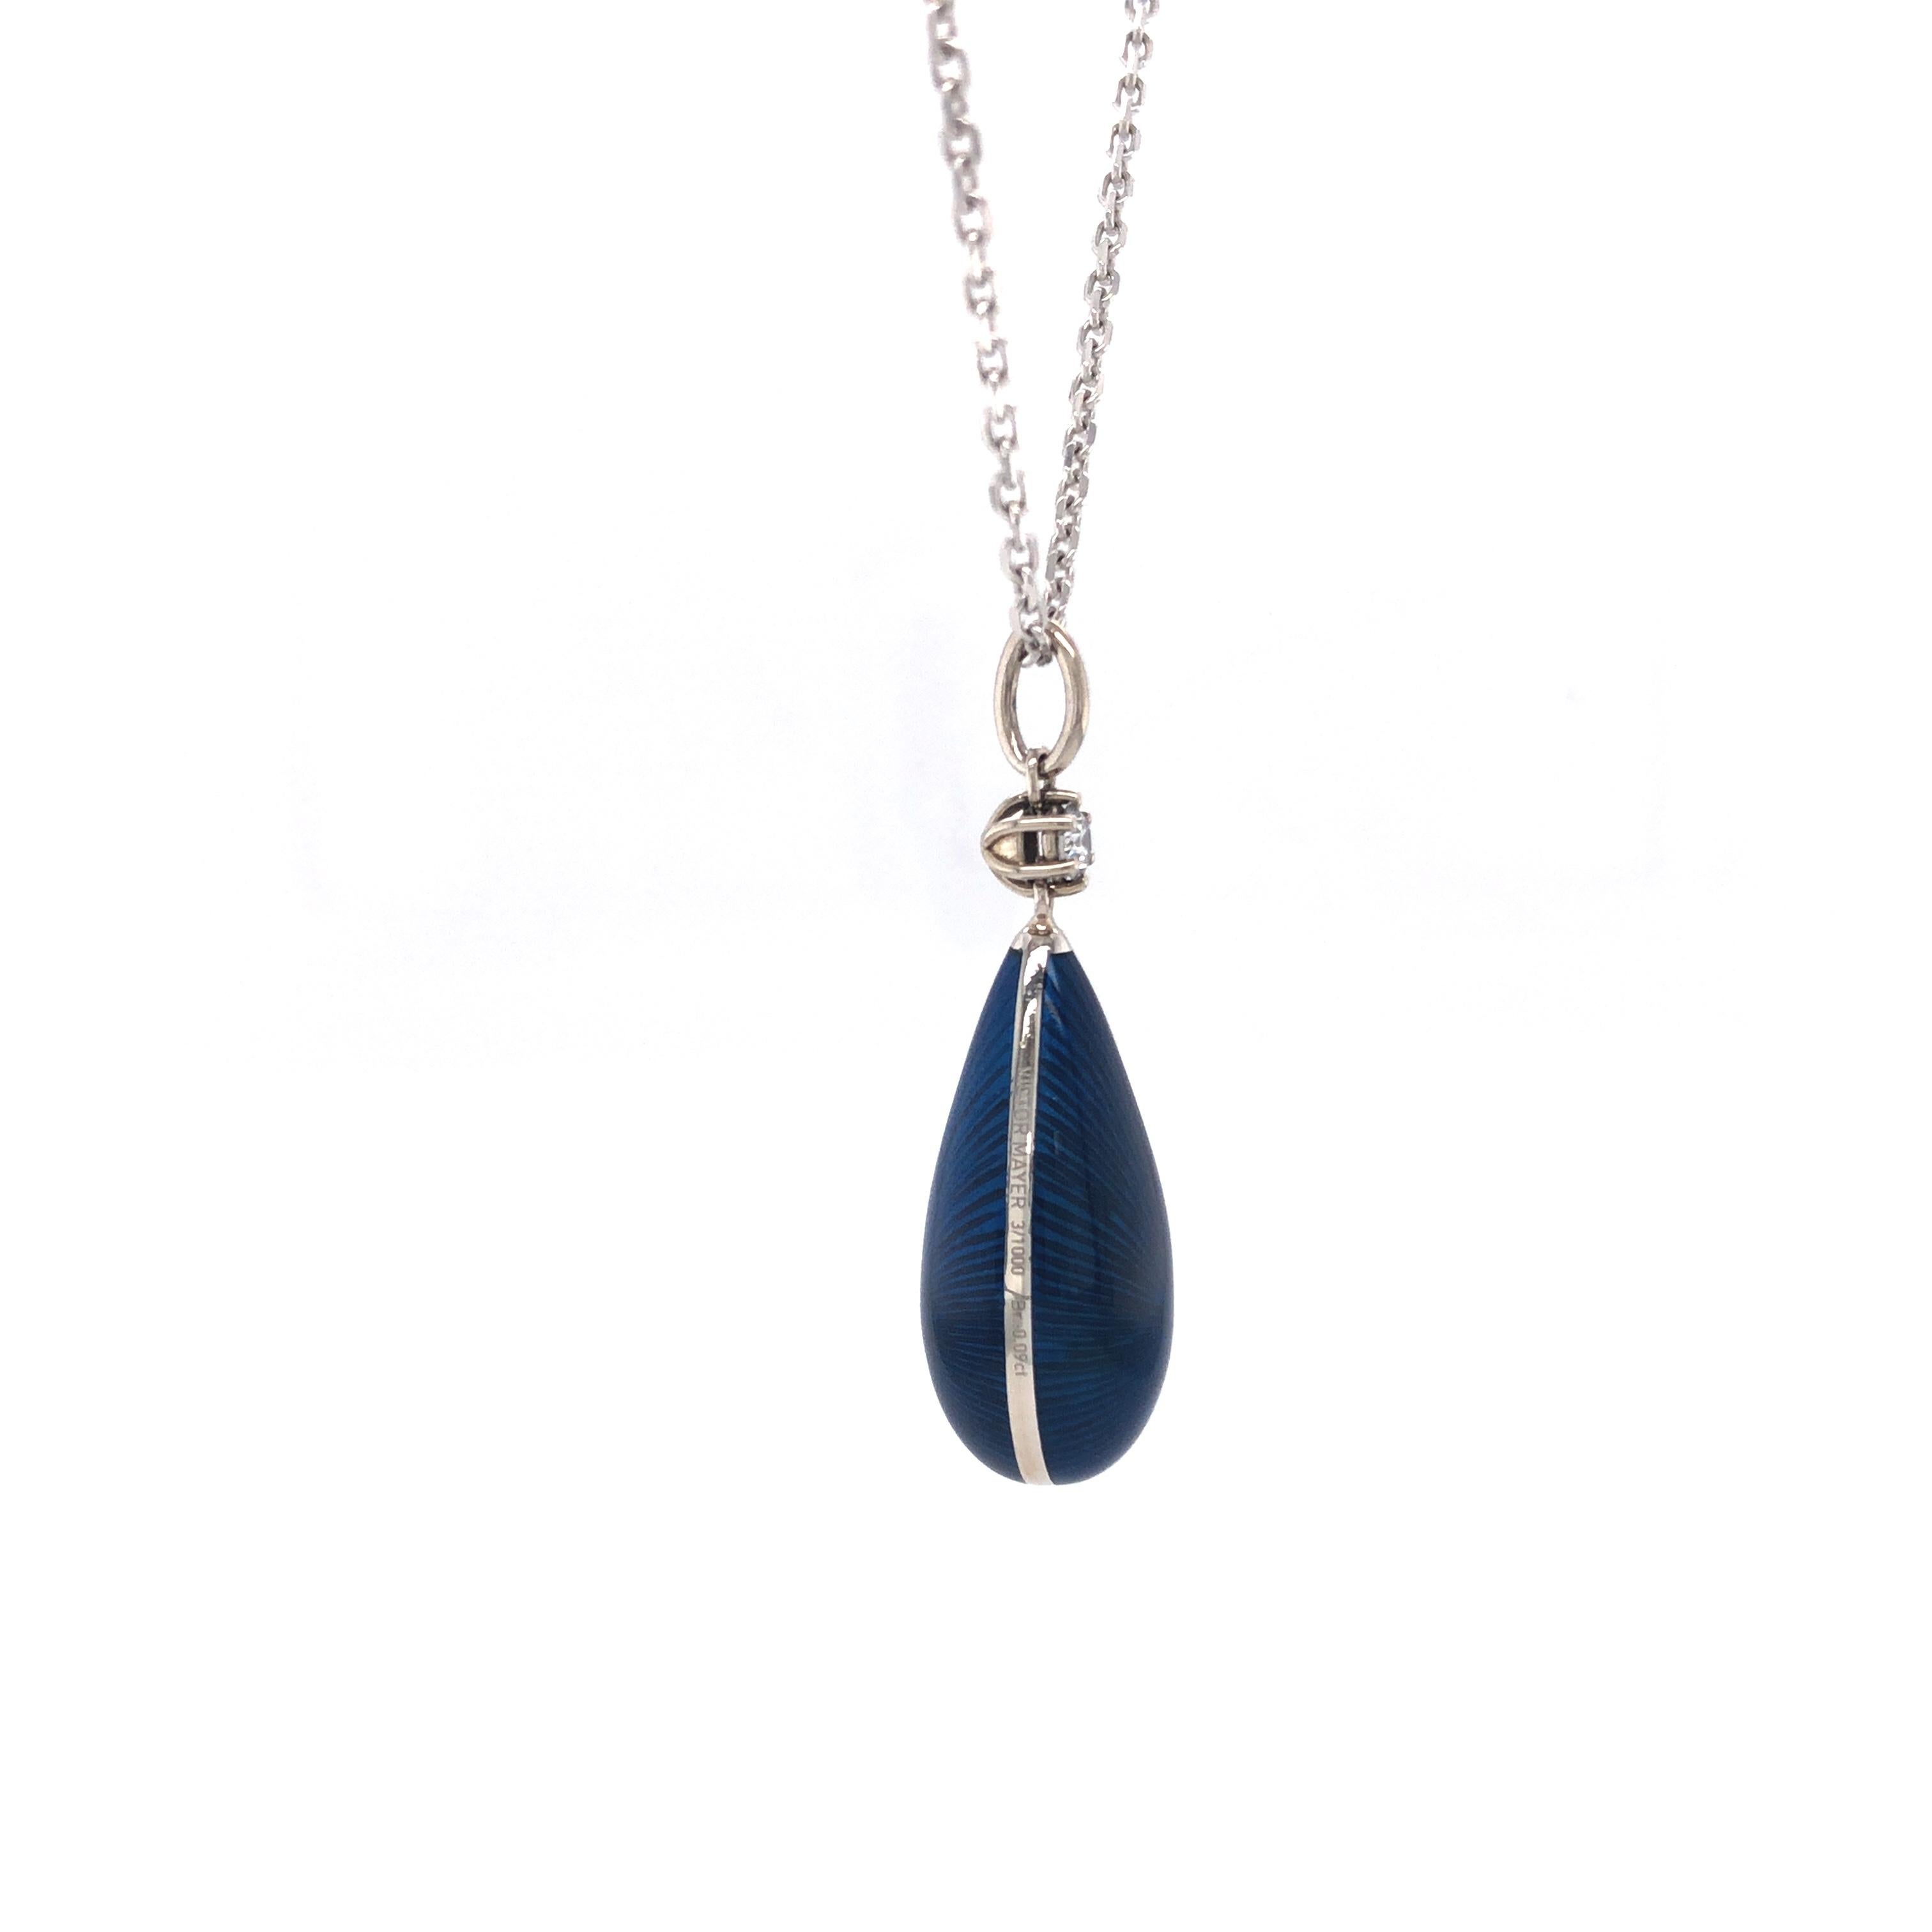 Drop pendant necklace, Dew Drop collection by Victor Mayer, 18k white gold, petrol blue guilloche enamel, 1 brilliant cut diamond total 0.09 ct, G VS , measurements app. 30.0 mm x 10.0 mm

About the creator Victor Mayer
Victor Mayer is